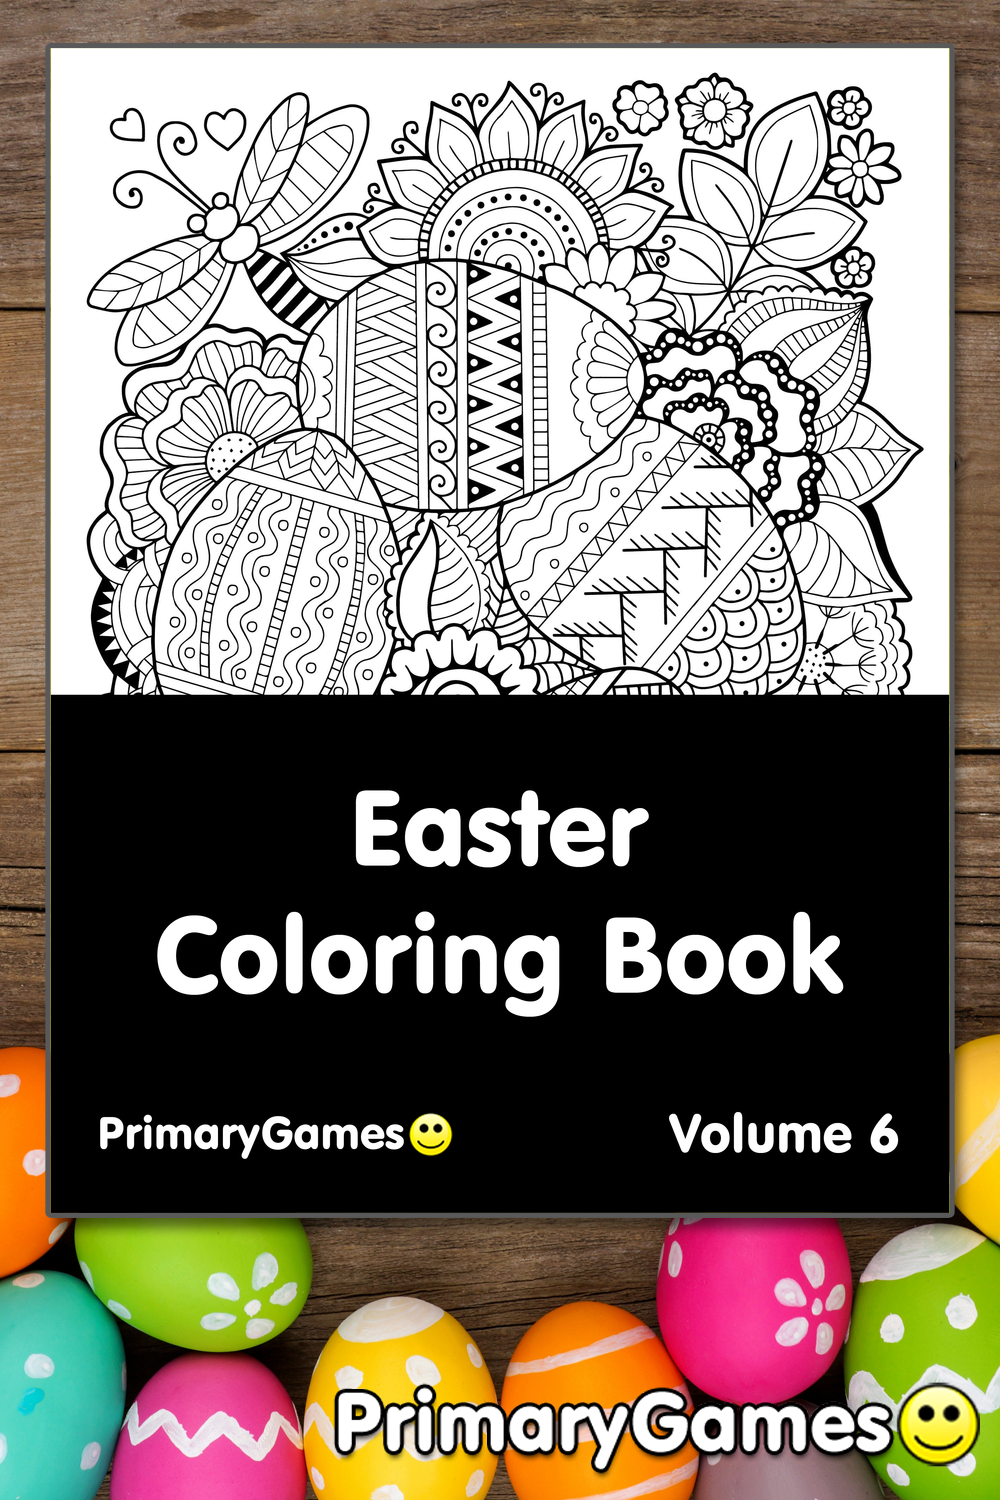 Easter Coloring eBook: Volume 6 • FREE Printable PDF from PrimaryGames